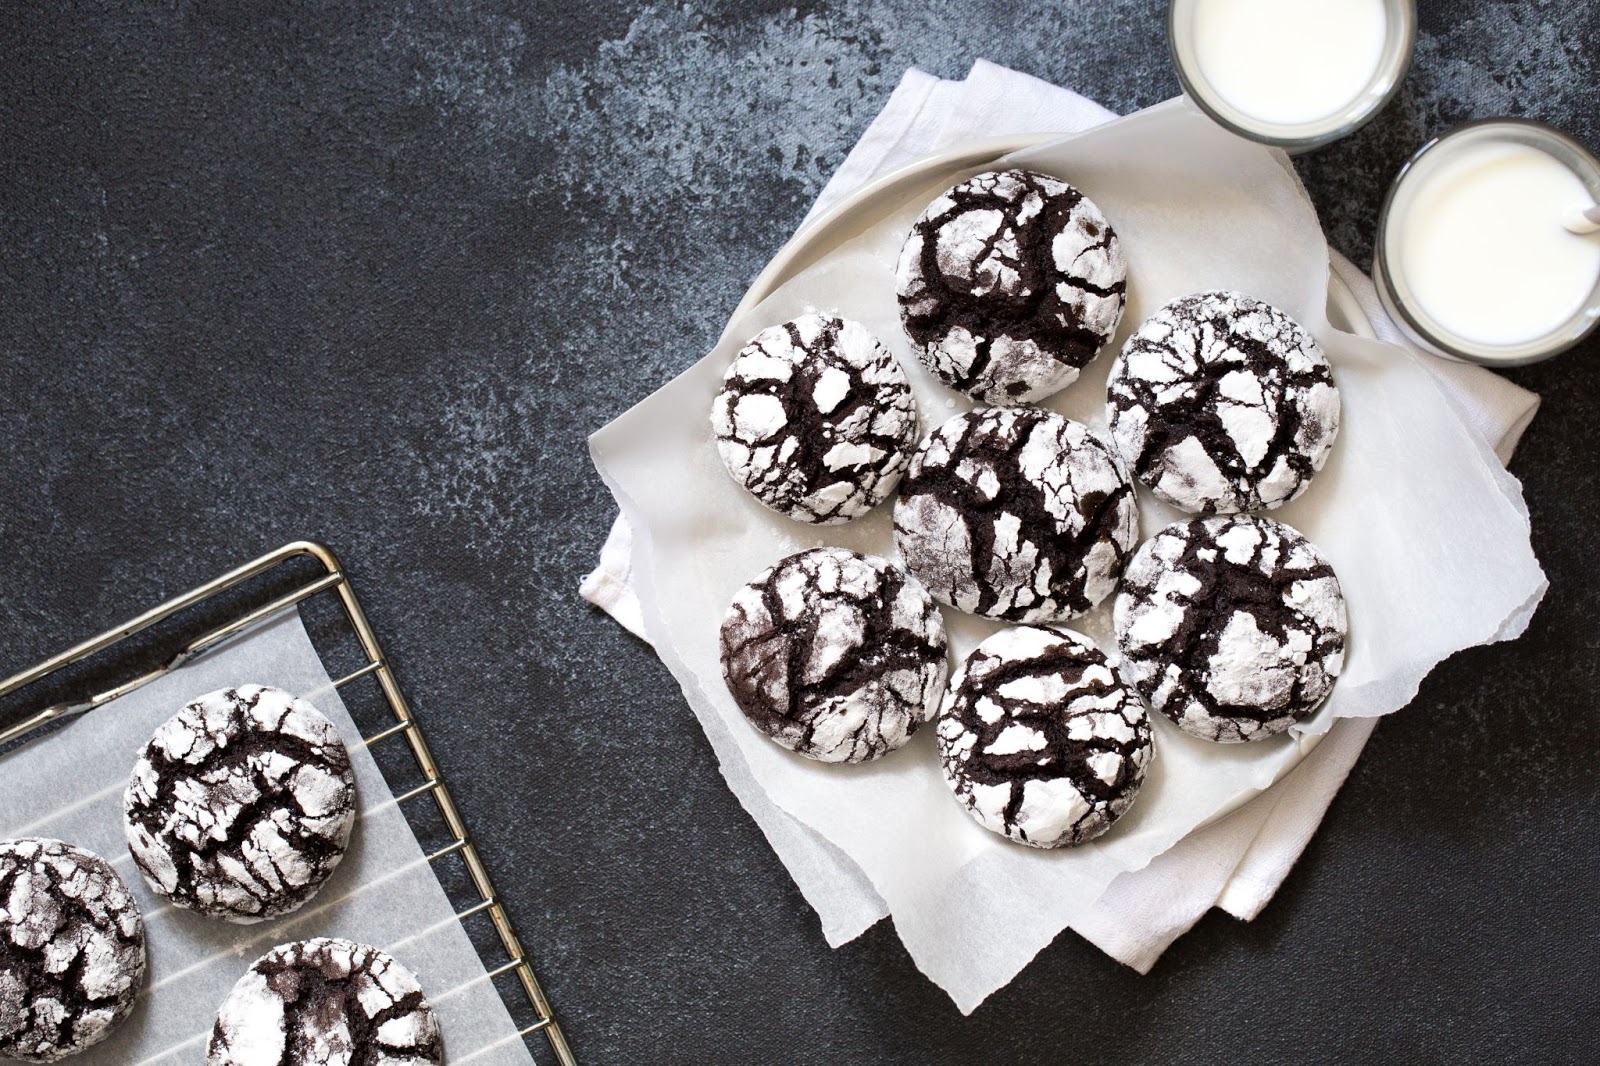 How to Make a Double Chocolate Crinkle Cookie